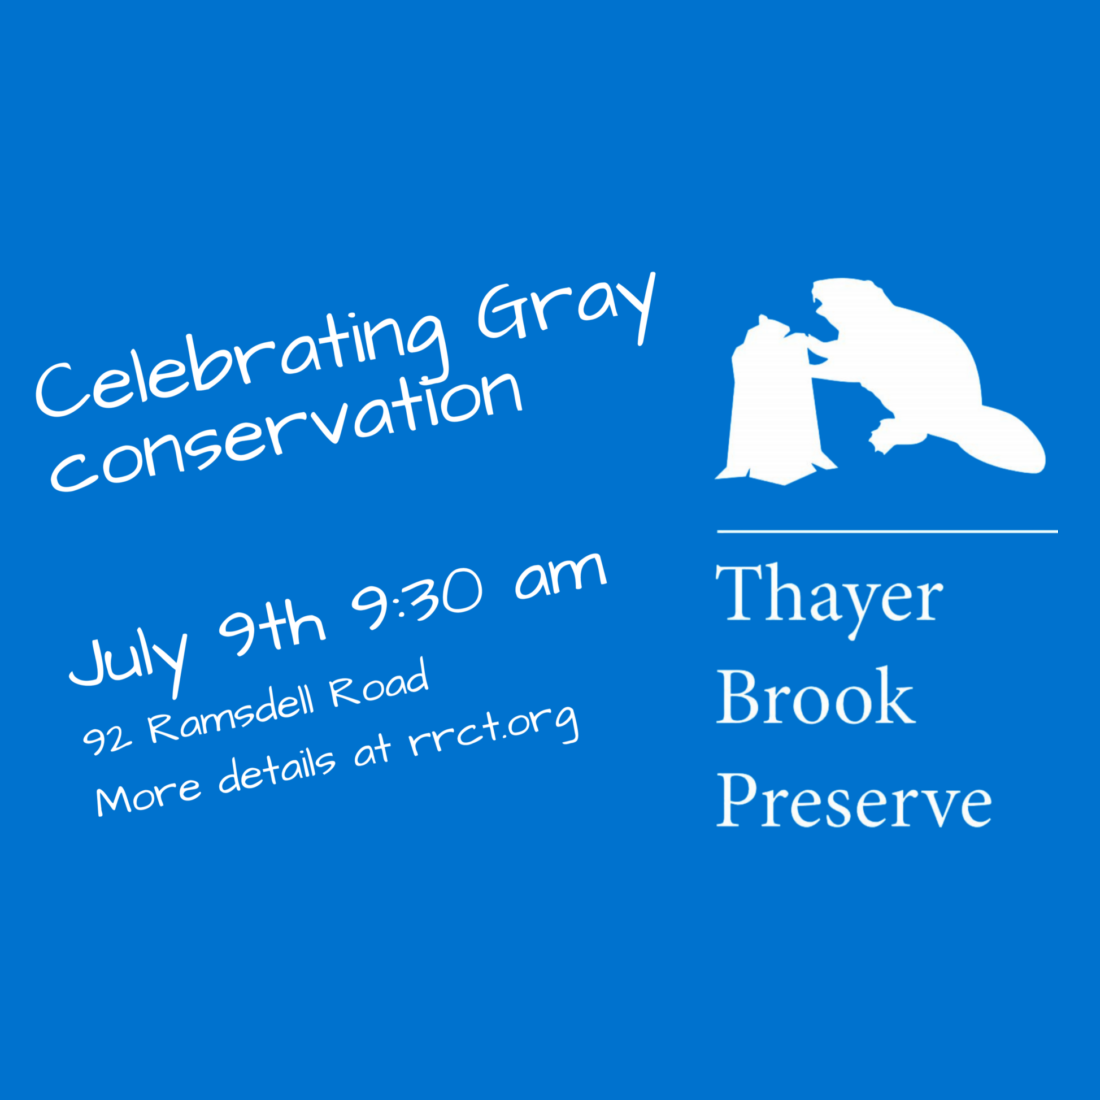 Thayer Brook Preserve Trail Opening July 9th, 9:30 am